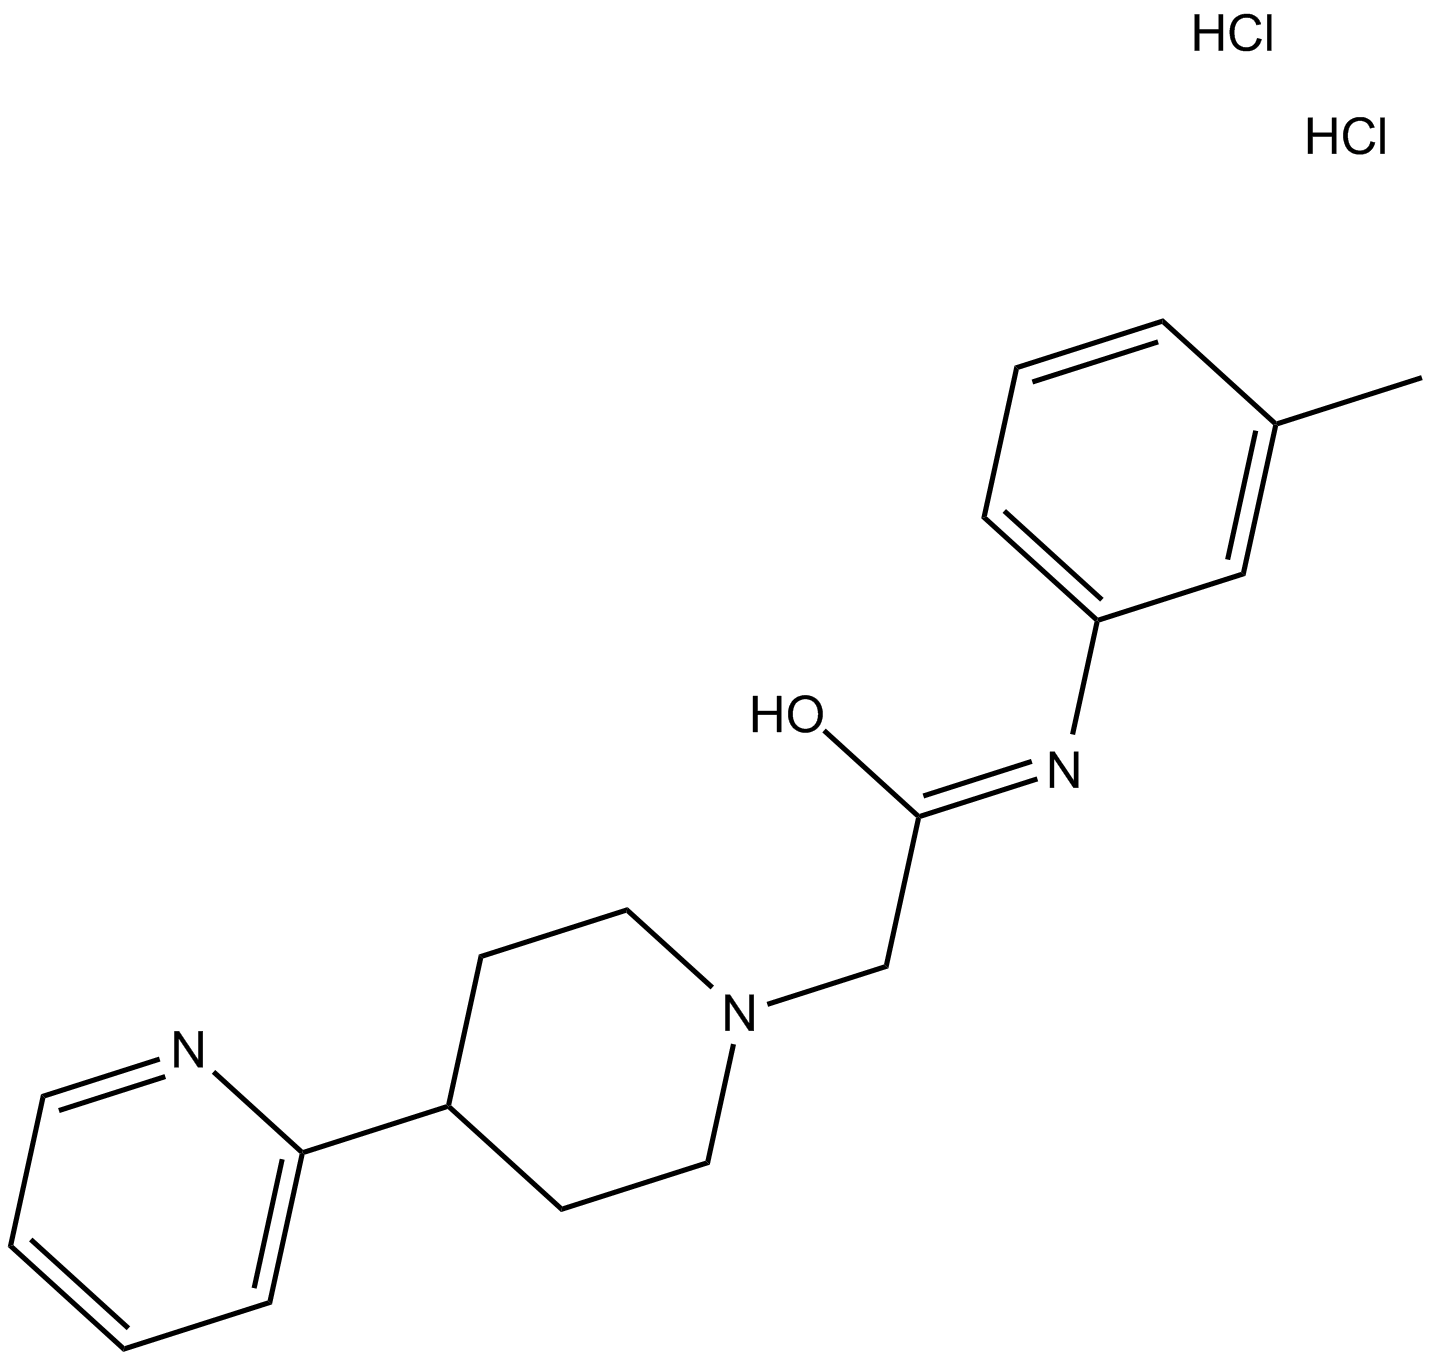 A 412997 dihydrochloride  Chemical Structure